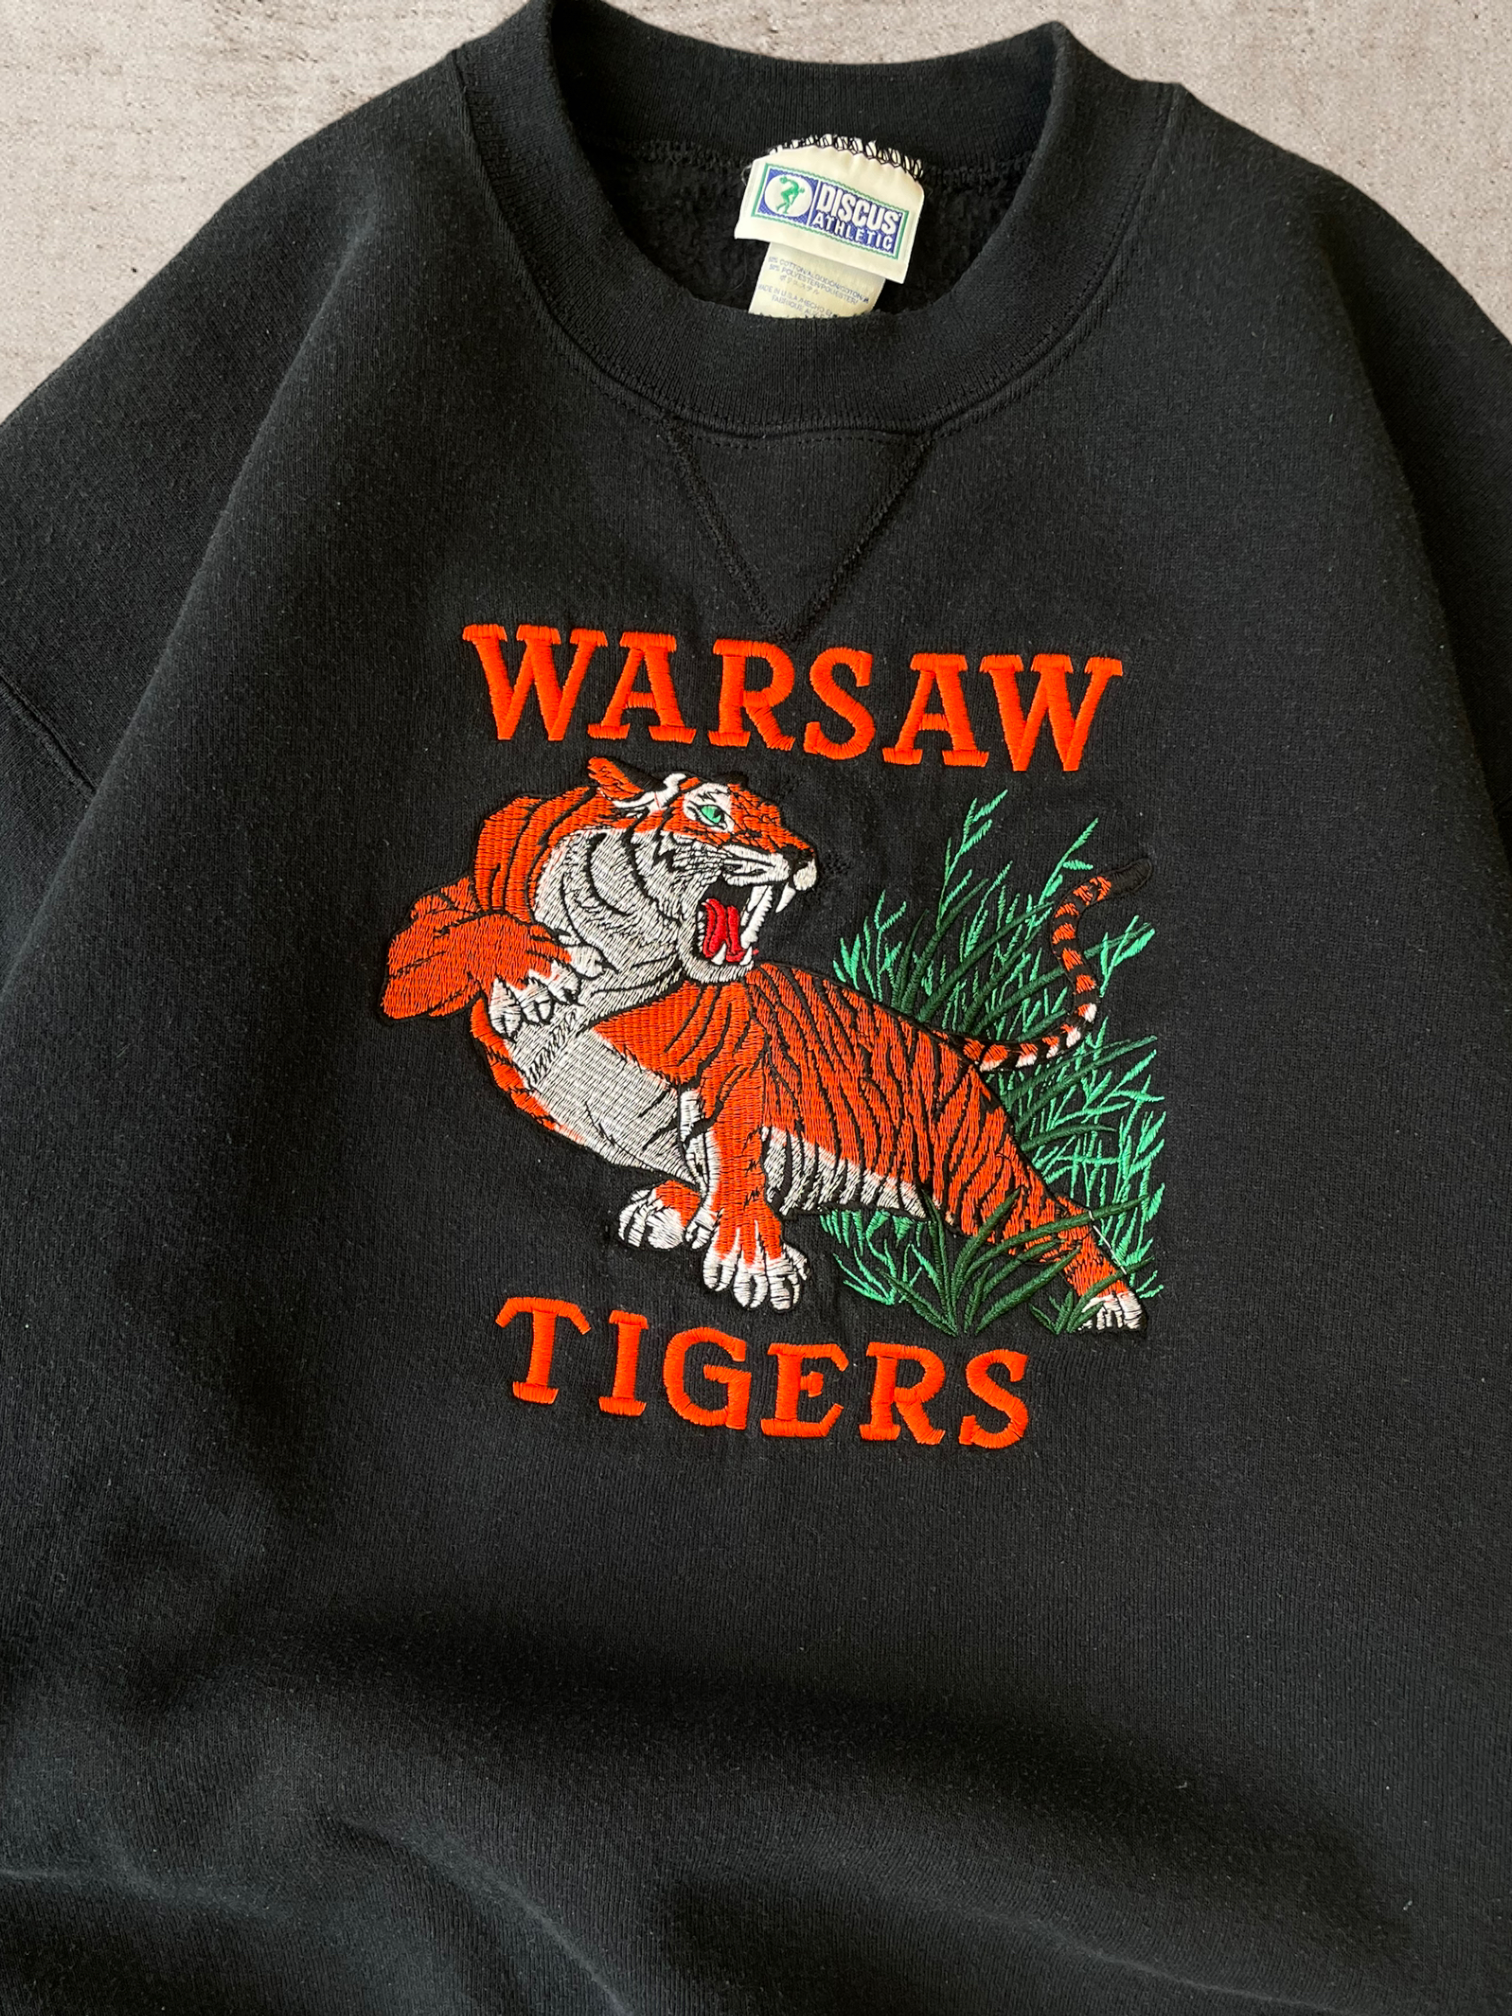 90s Warsaw Tigers Embroidered Crewneck - Large